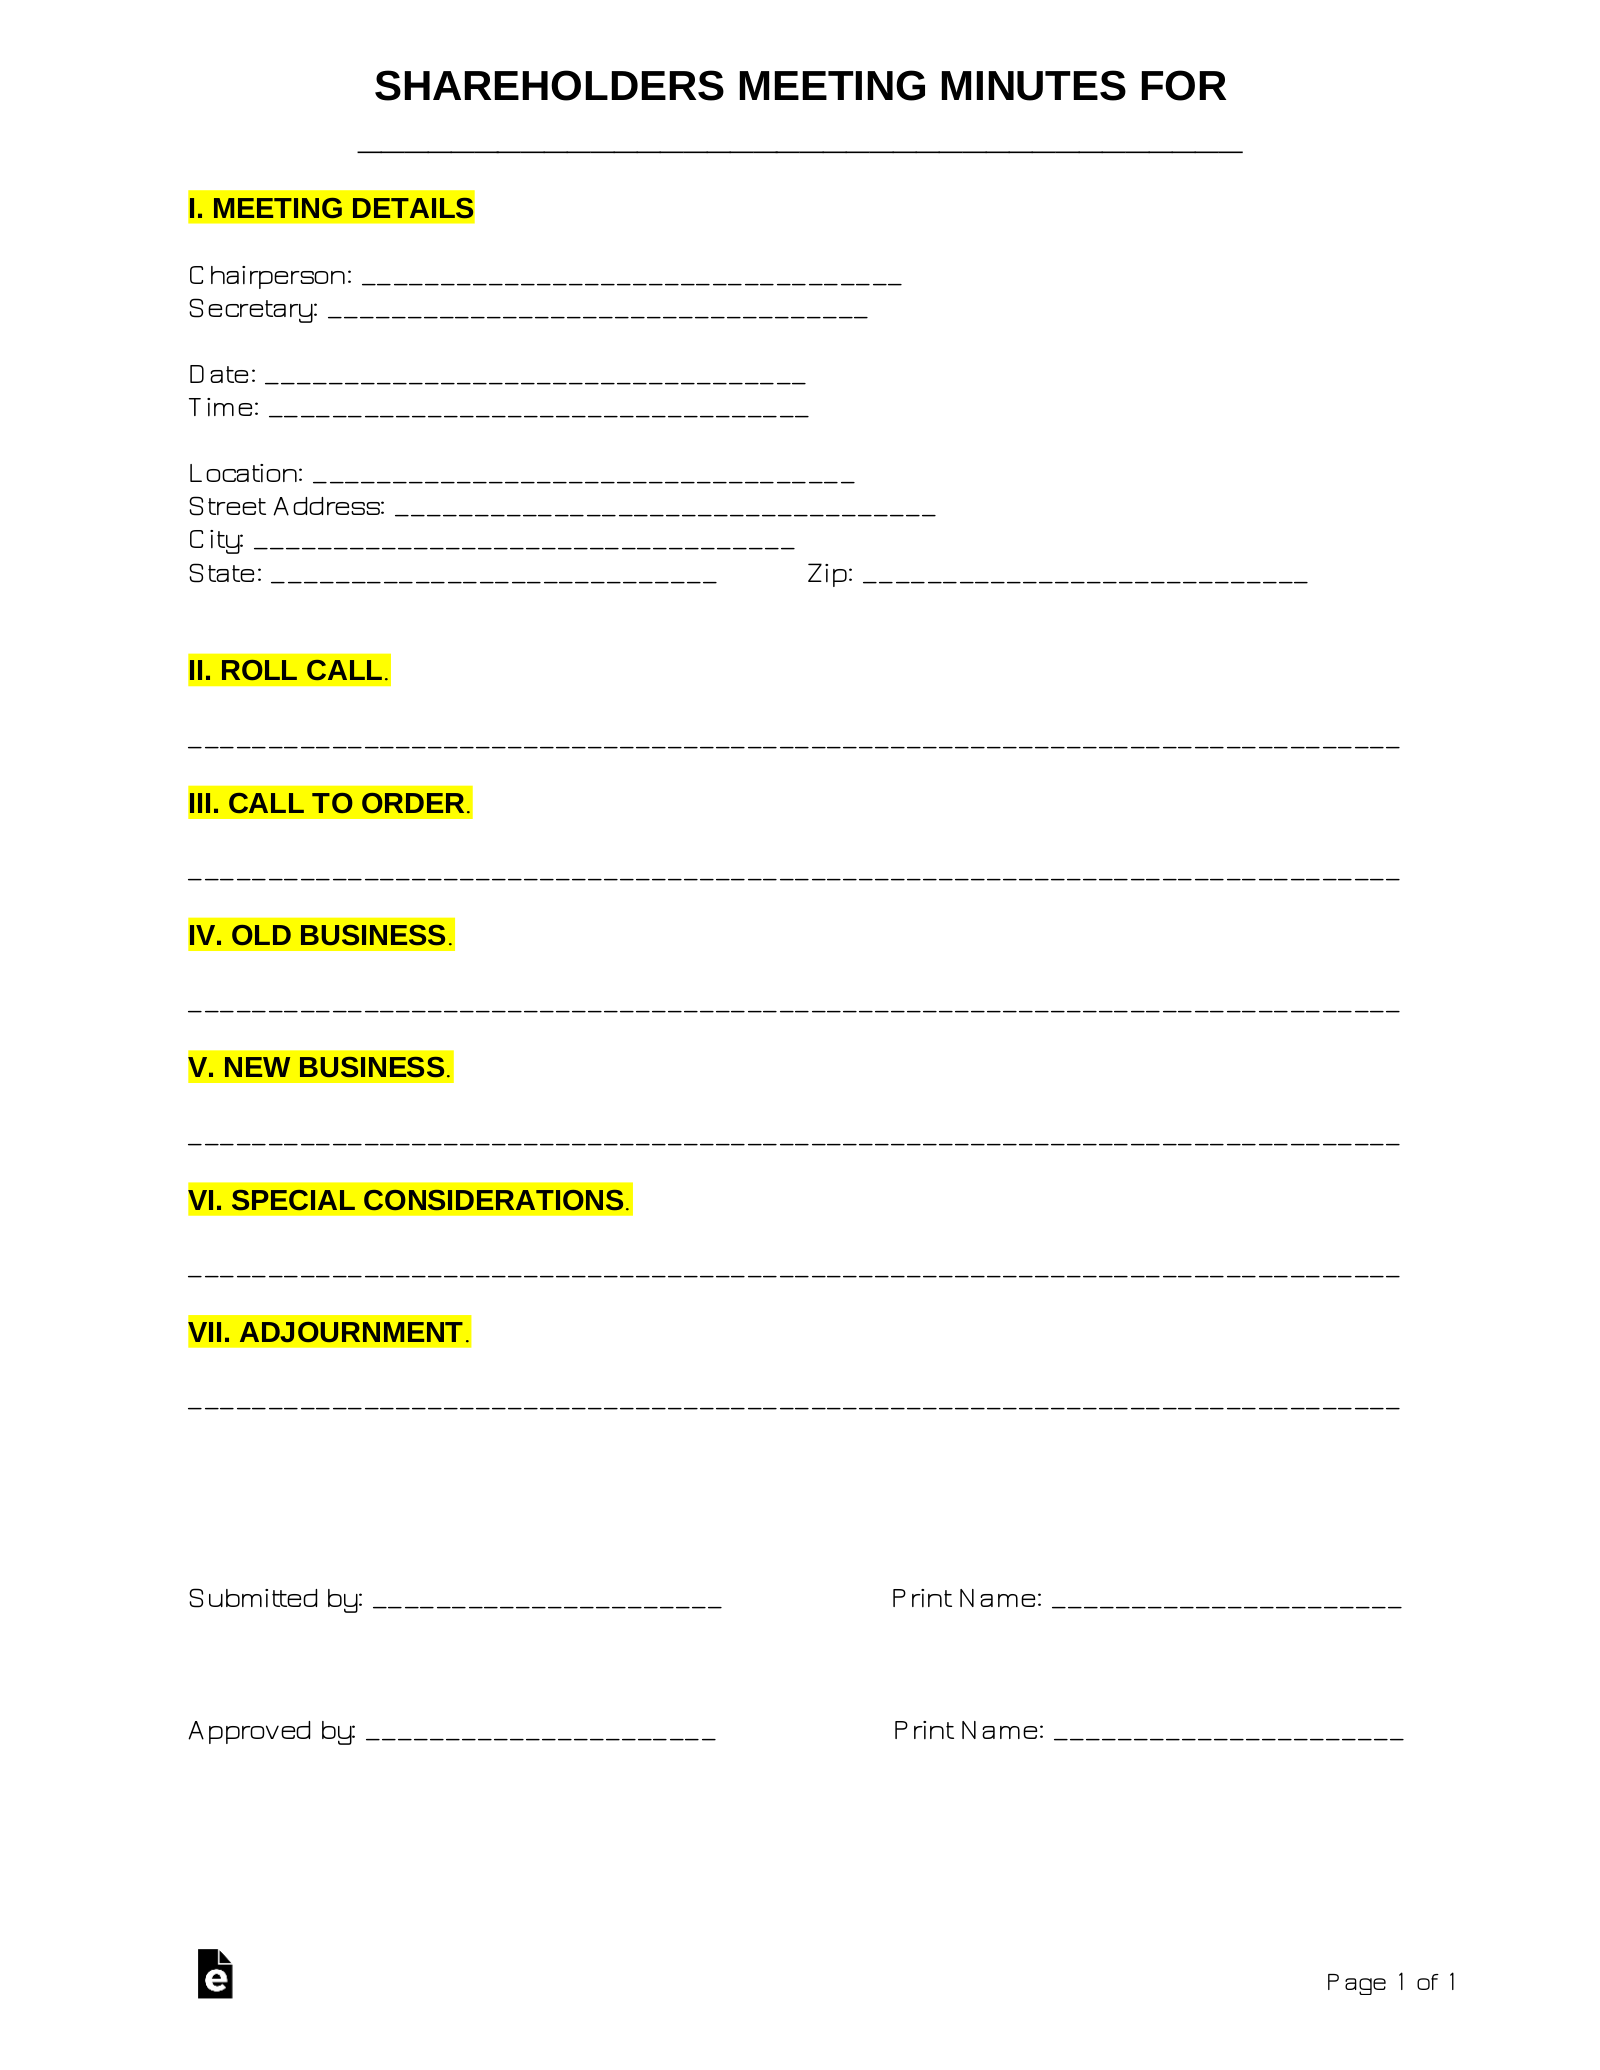 Free Shareholders Meeting Minutes Template Sample PDF Word eForms